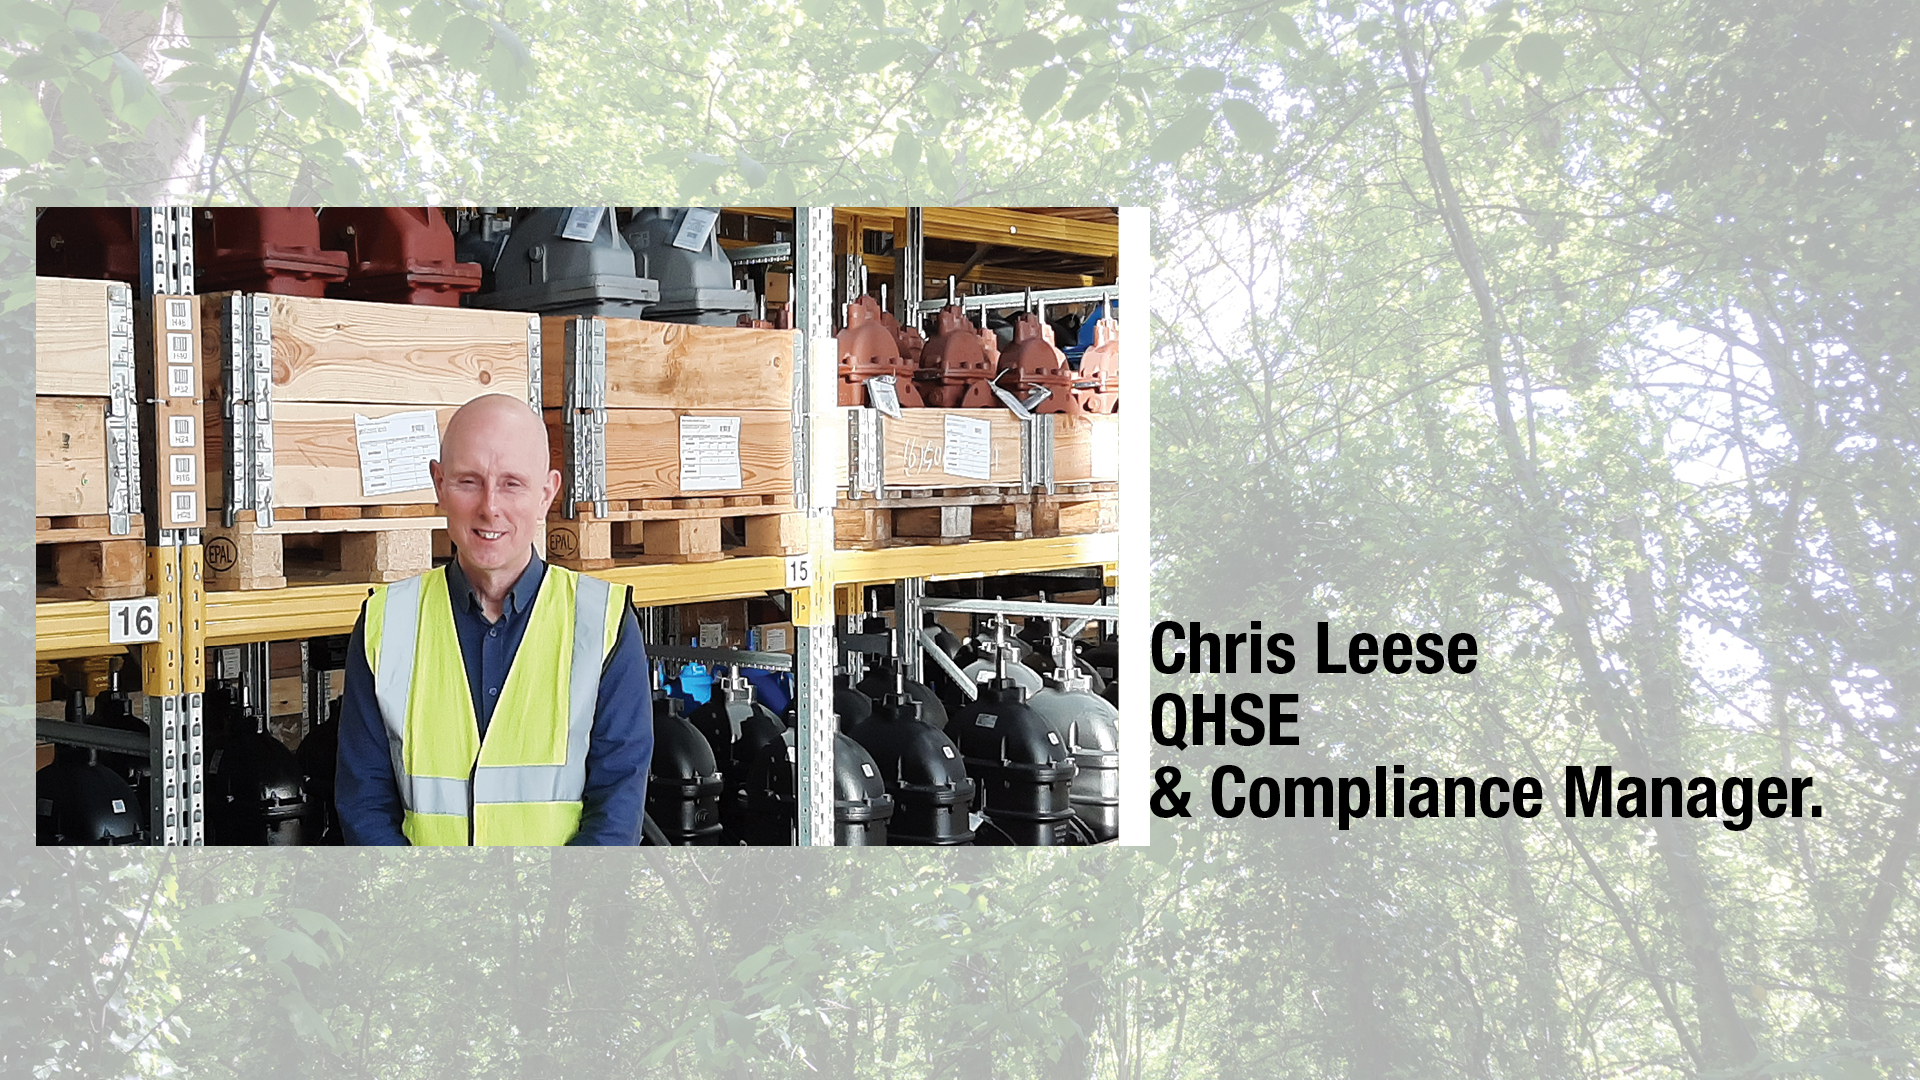 Chris Leese AVK UK QHSE and Compliance Manager